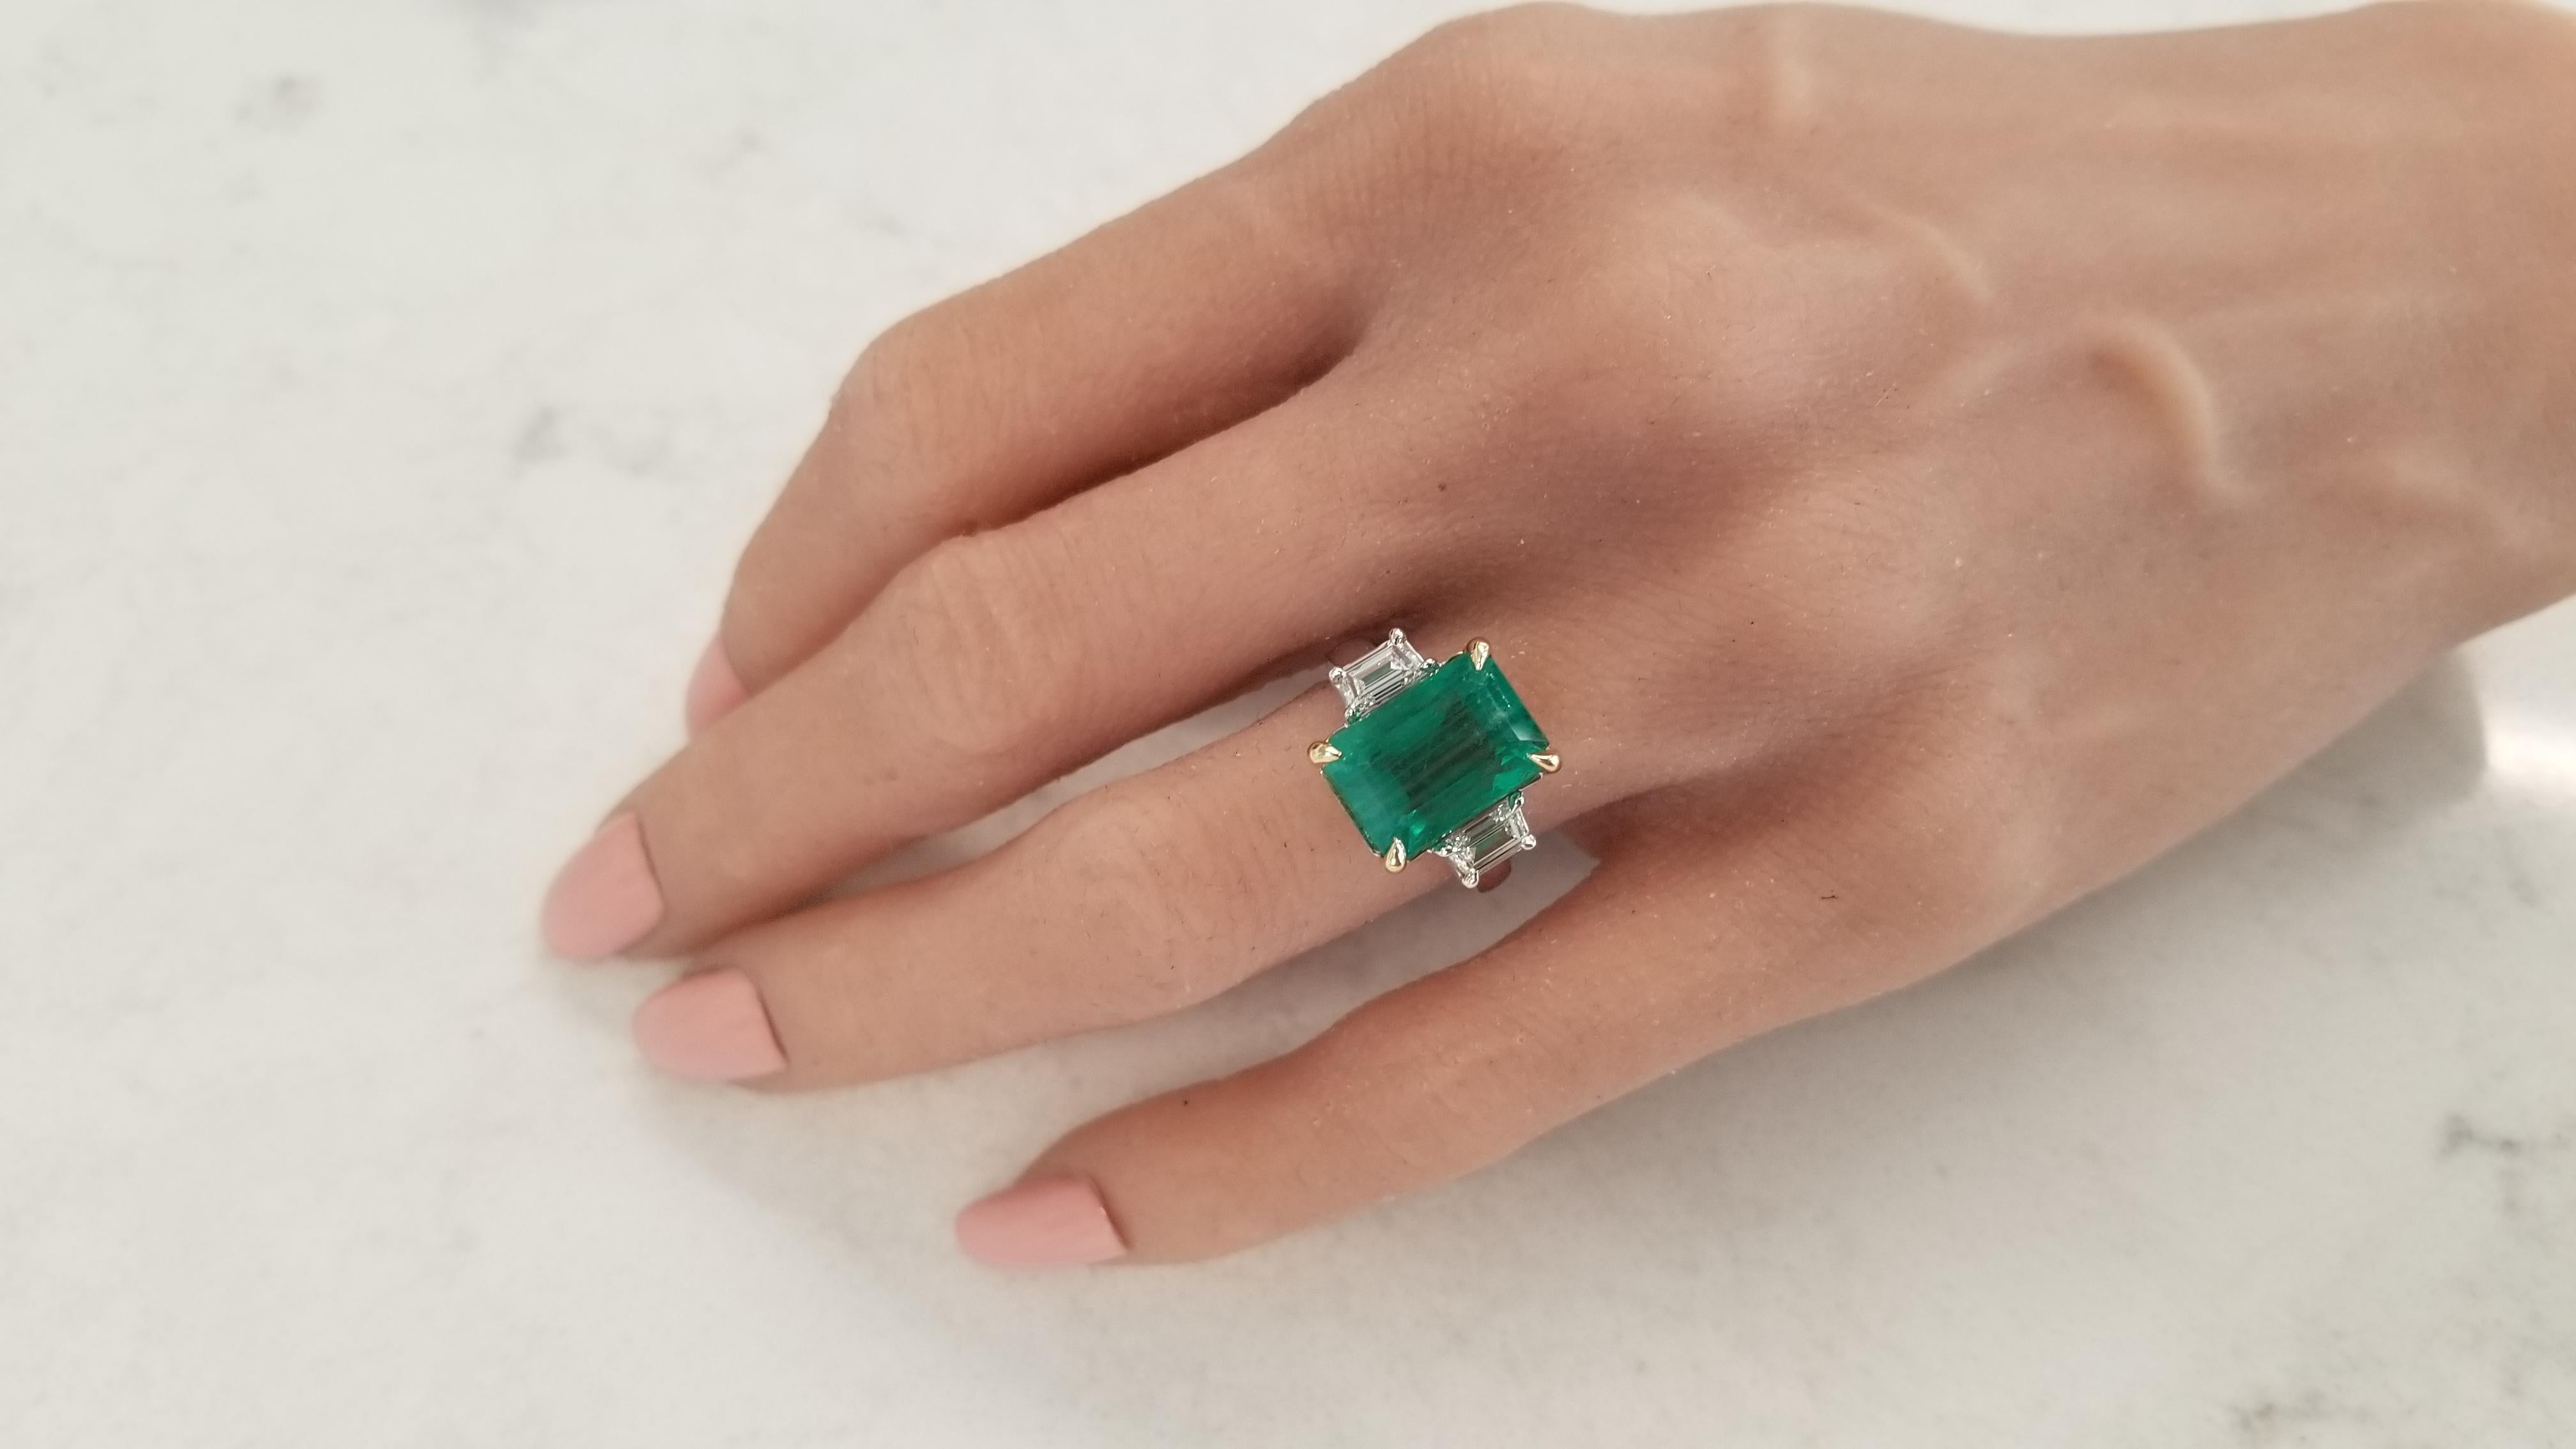 This is a three-stone ring that is timeless, classic, and richly unique. A 7.80 carat octagonal cut green emerald is skillfully prong set in the center in shiny yellow gold accenting and measures 12.50x9.00MM. The gem source is Zambia; its color is